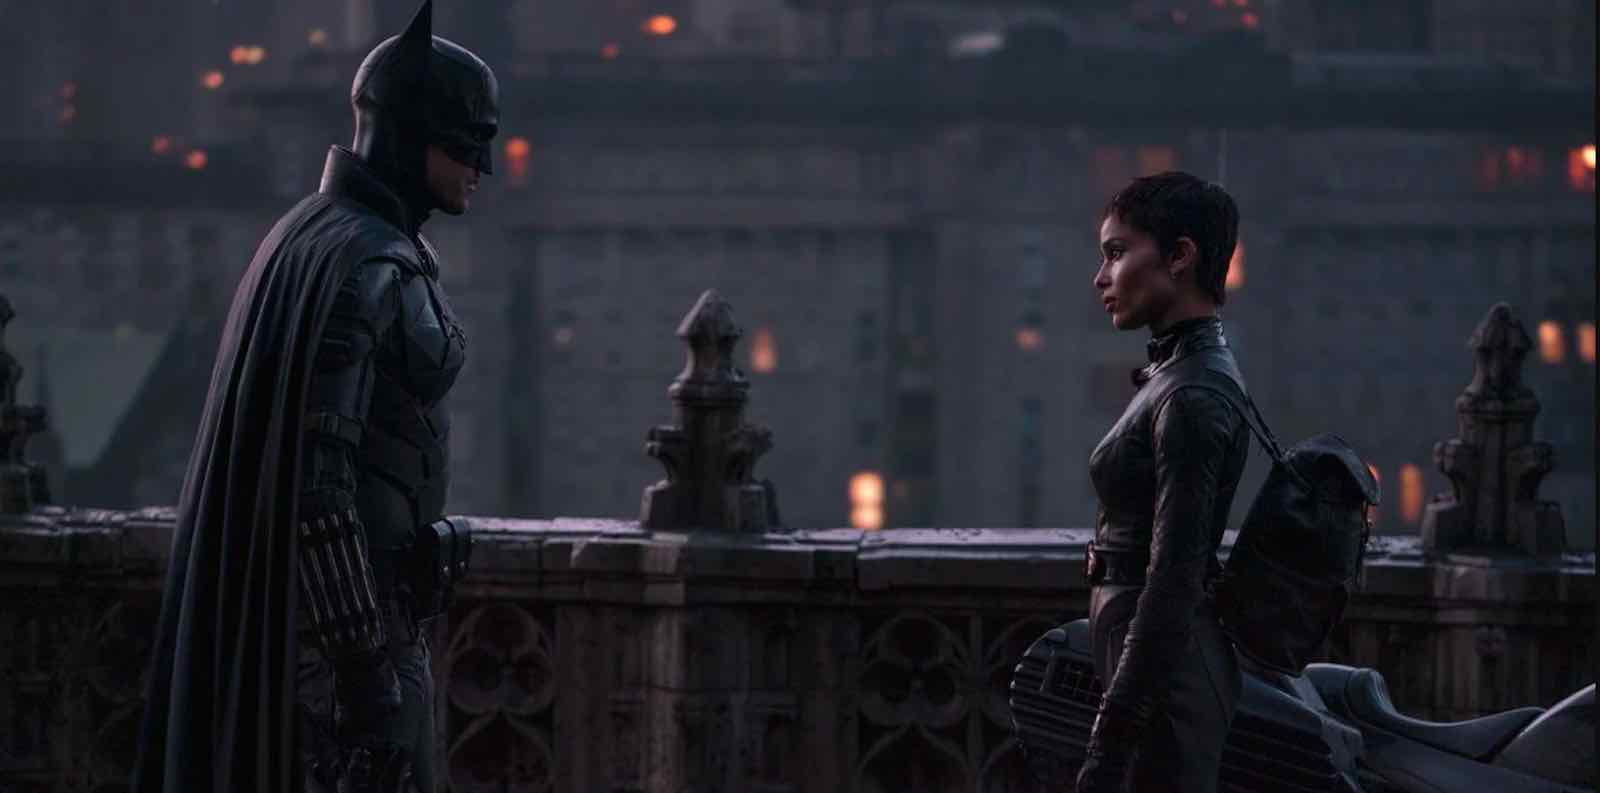 Watch ‘The Batman’ (2022) Free online streaming At home